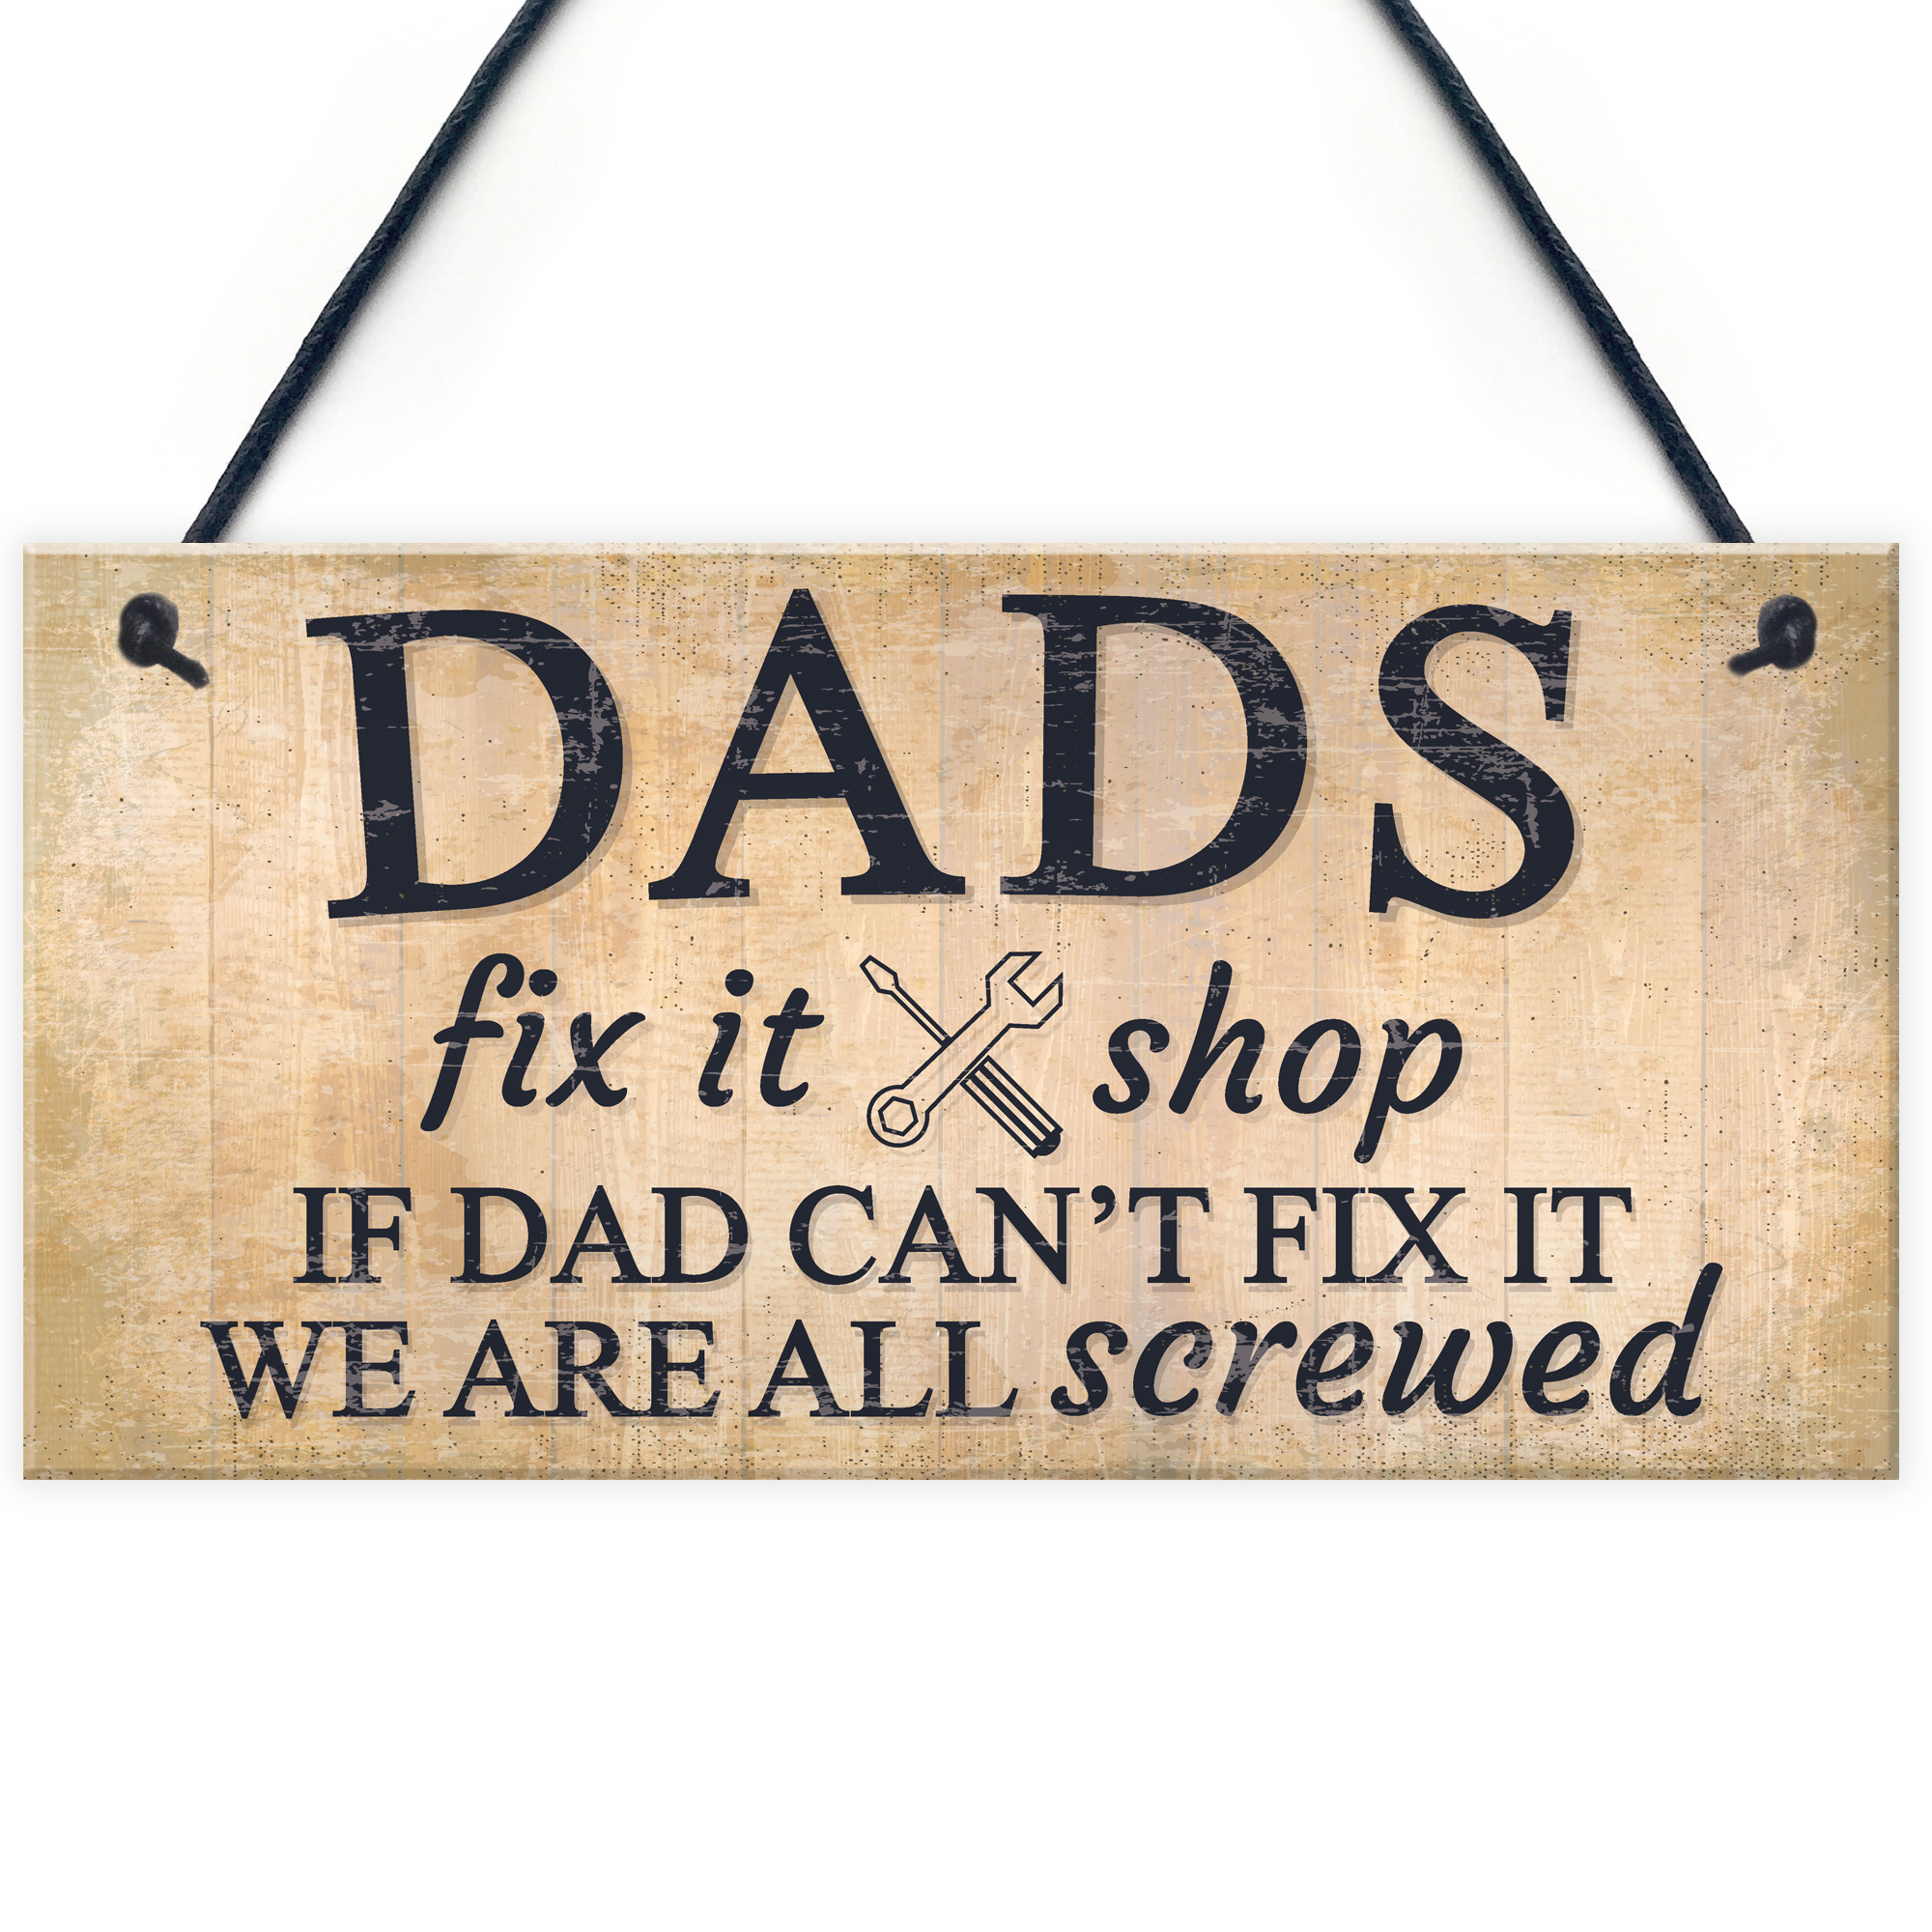 "DADS SHED" BRAND NEW ITEMS GARDEN SHED/GARAGE WALL PLAQUE WALL SIGN 